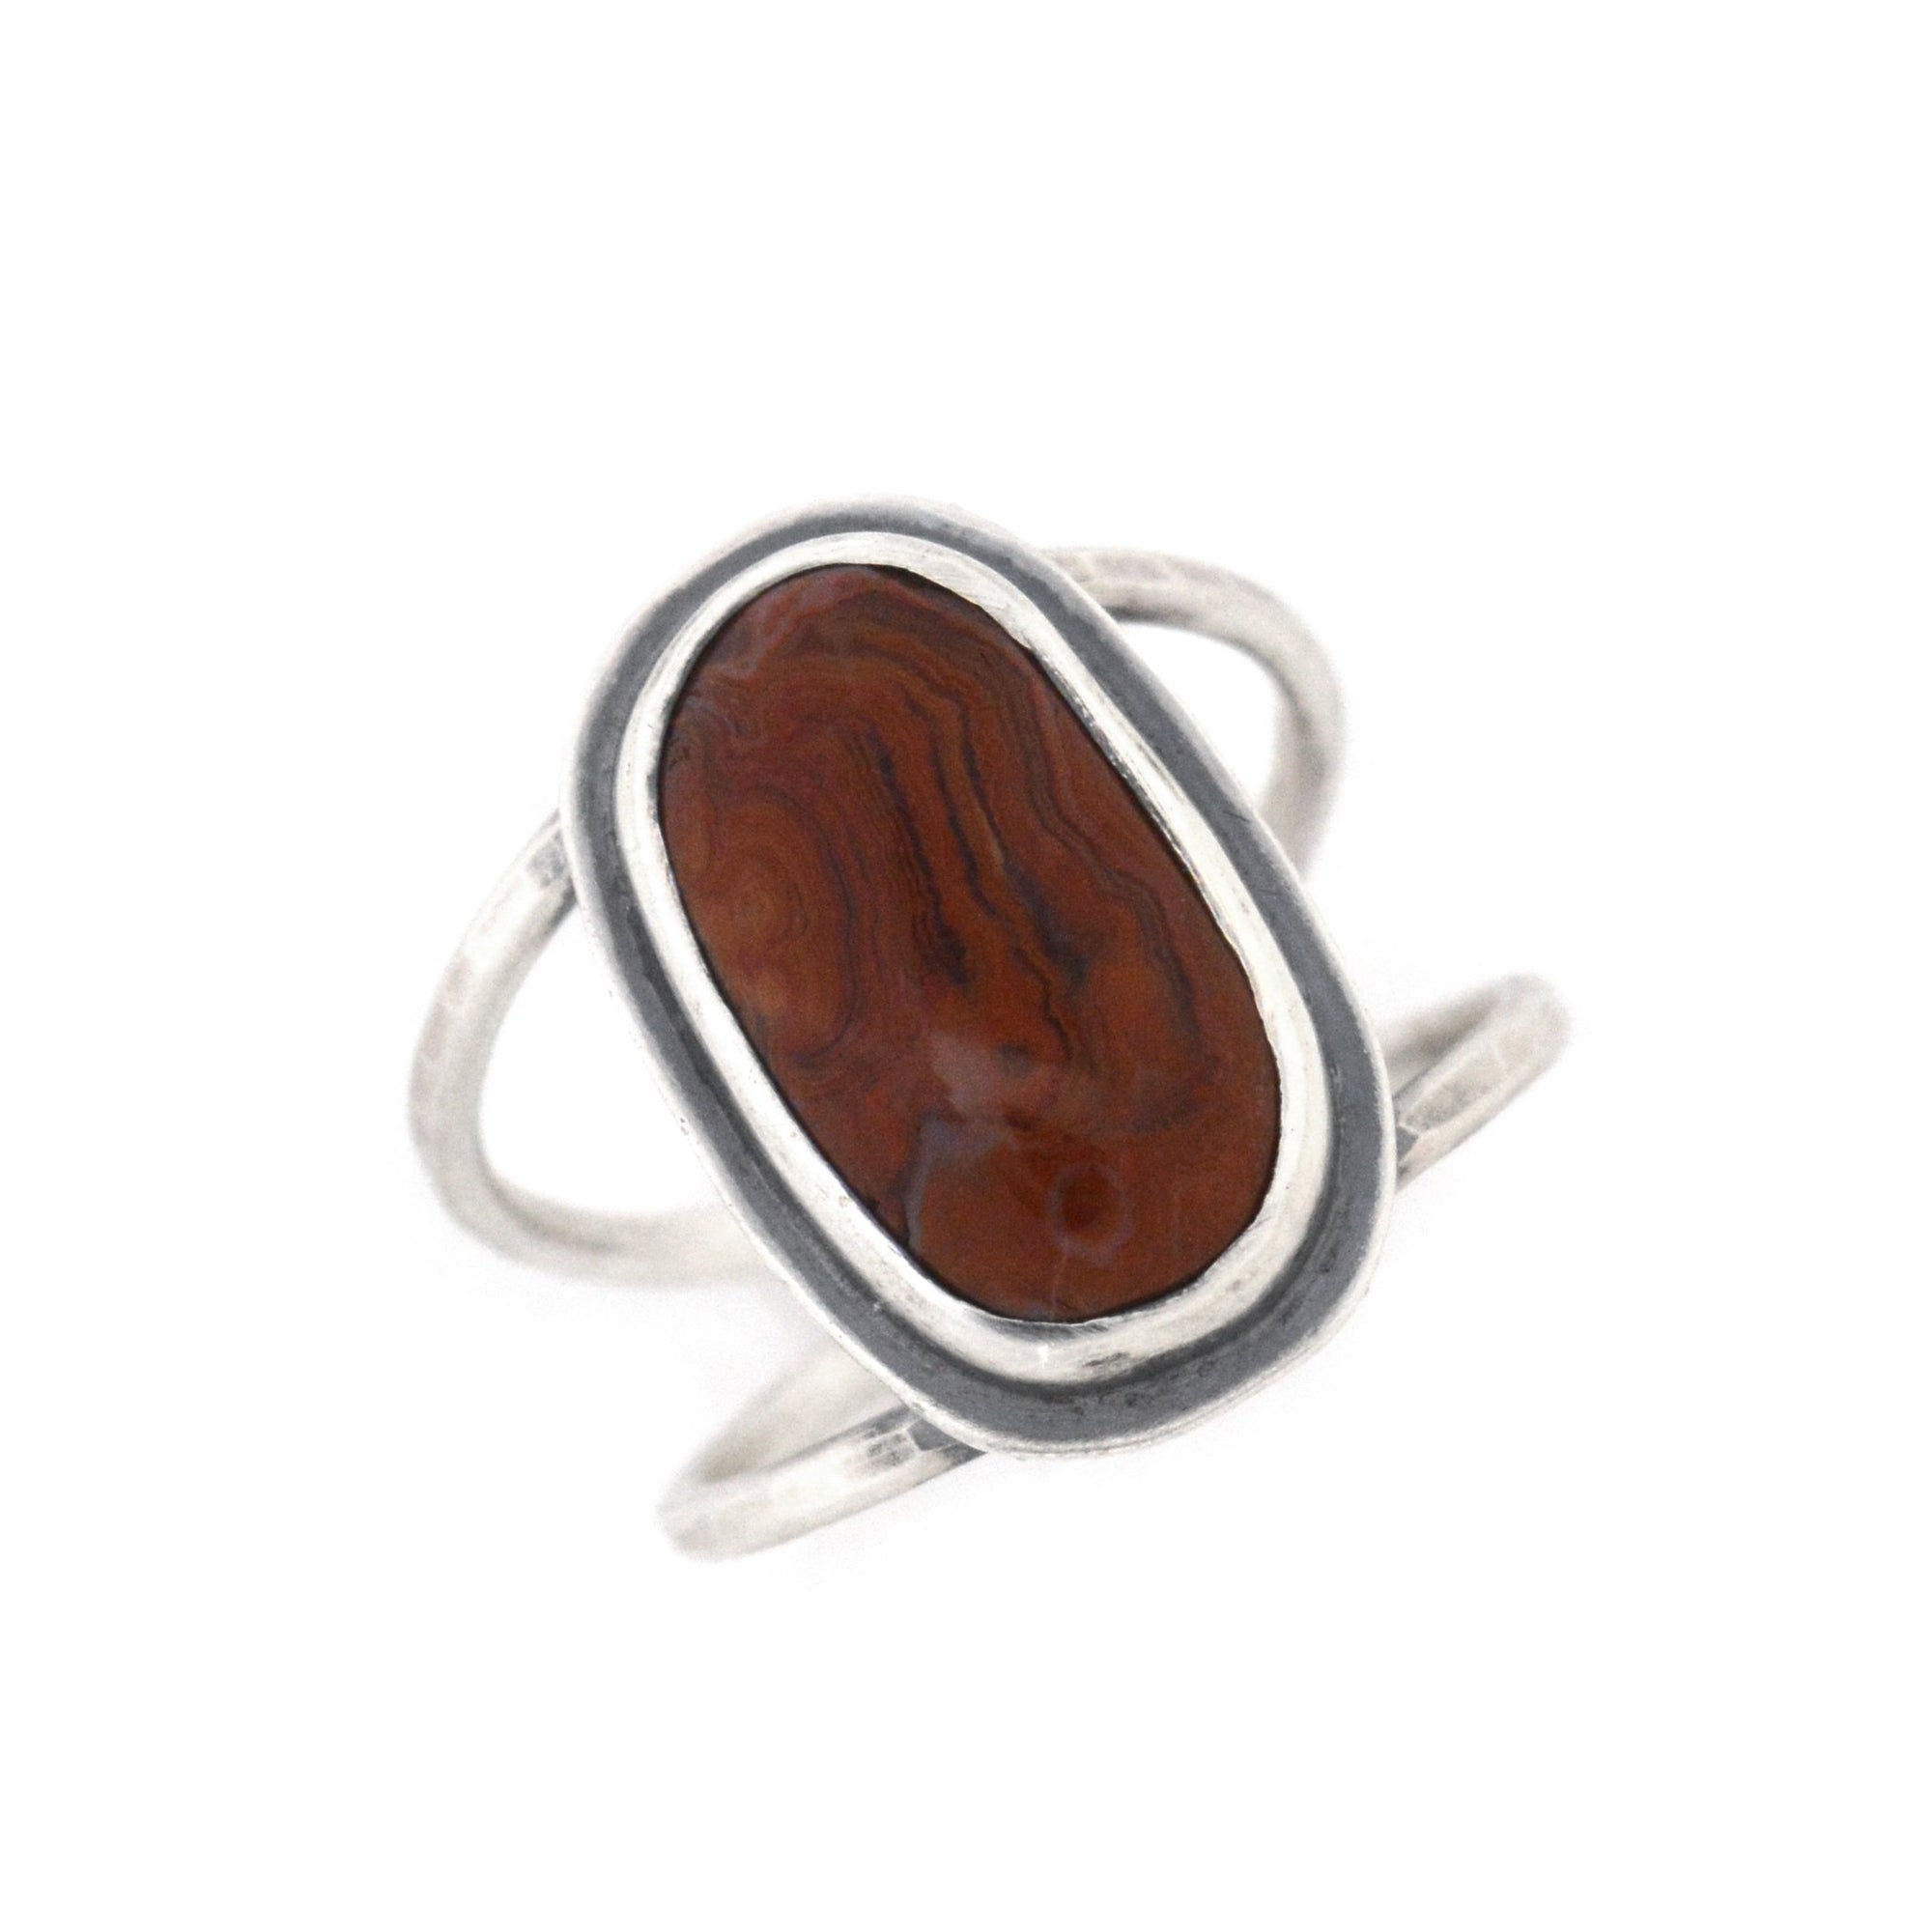 Marquette Lake Superior Agate Ring - Size 8.5 - Ring   3867 - handmade by Beth Millner Jewelry